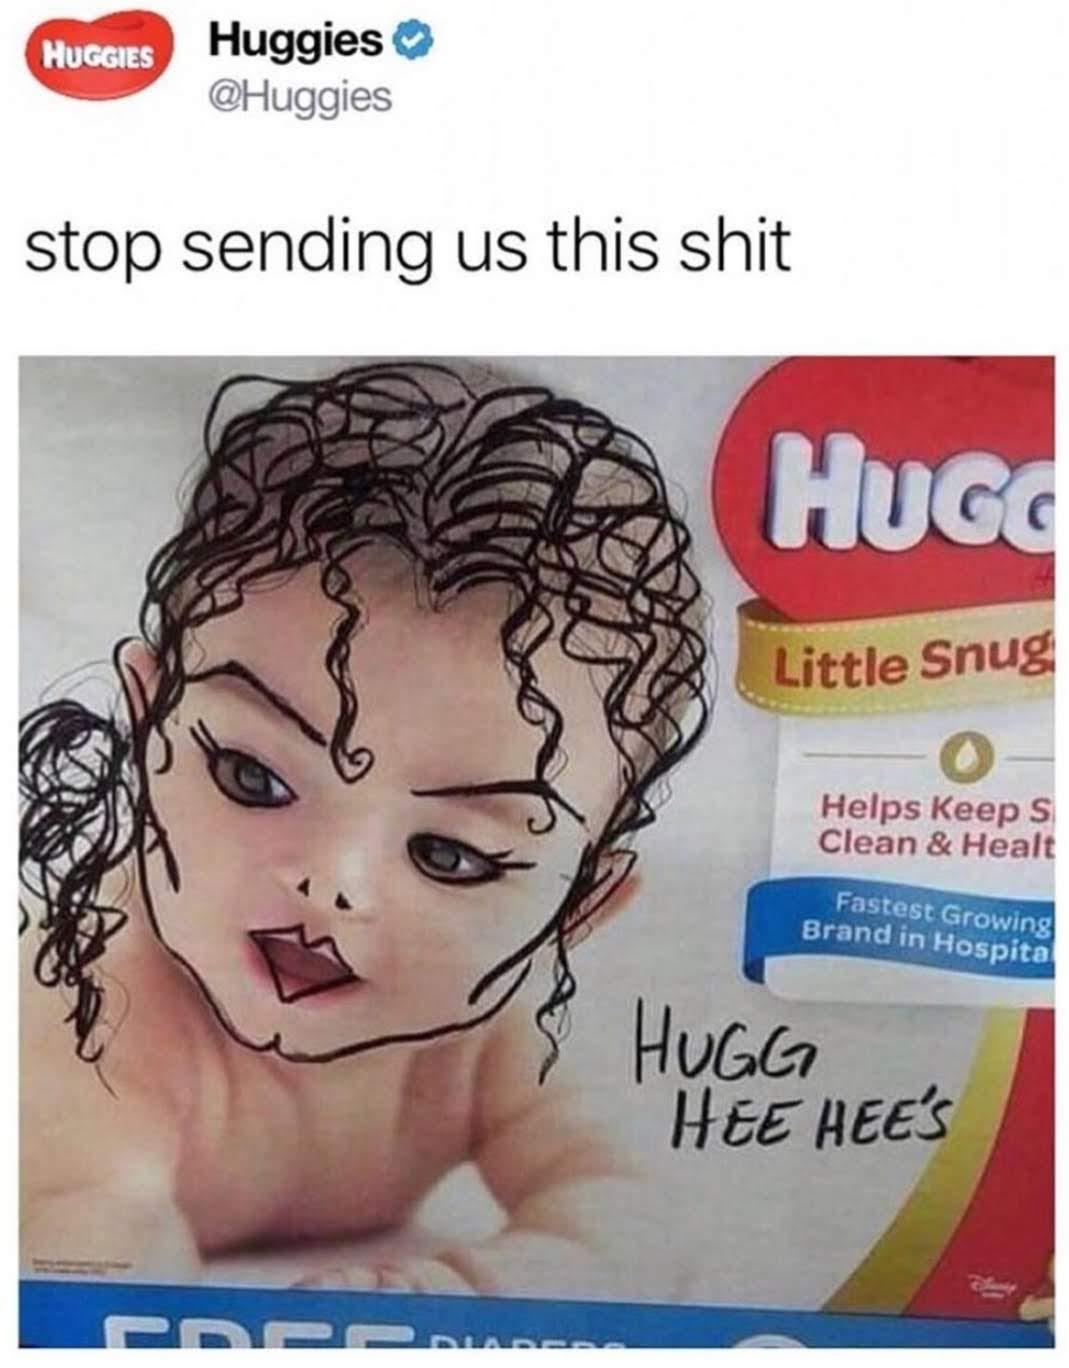 Could you not? - Huggies, probably.